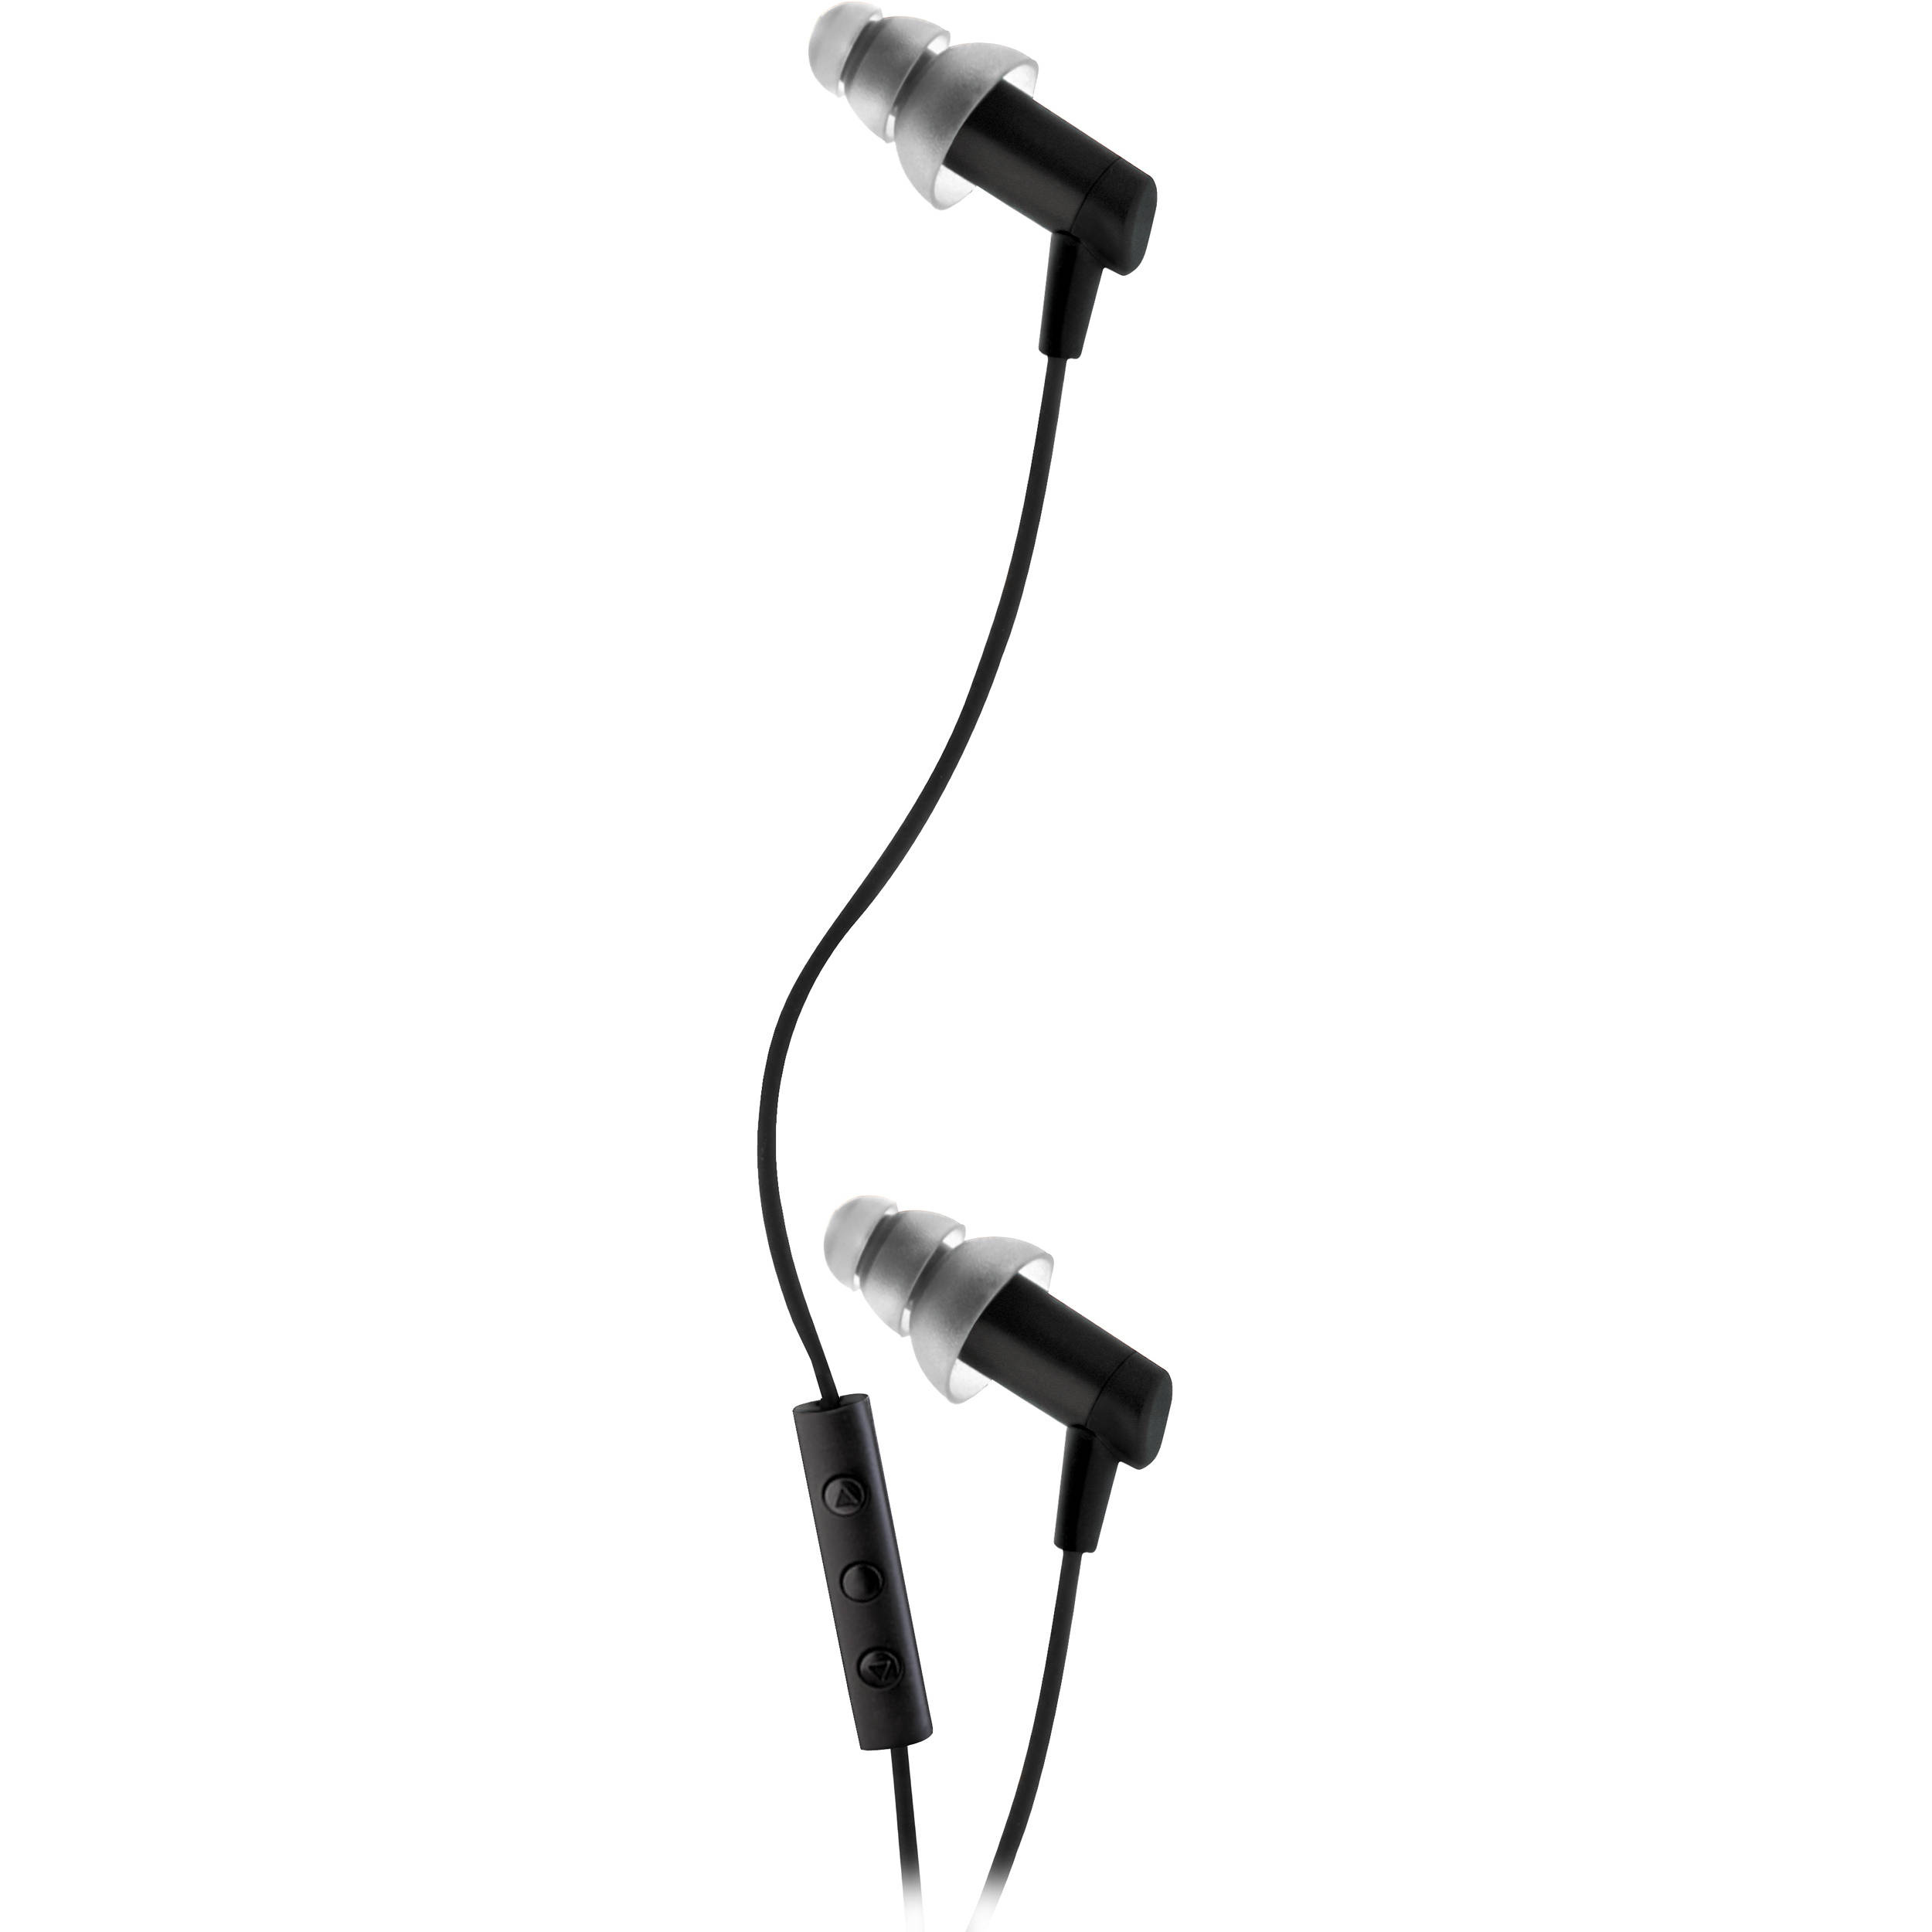 Etymotic Research hf3 Noise-Isolating In-Ear Stereo Headphones with Mic (Black)